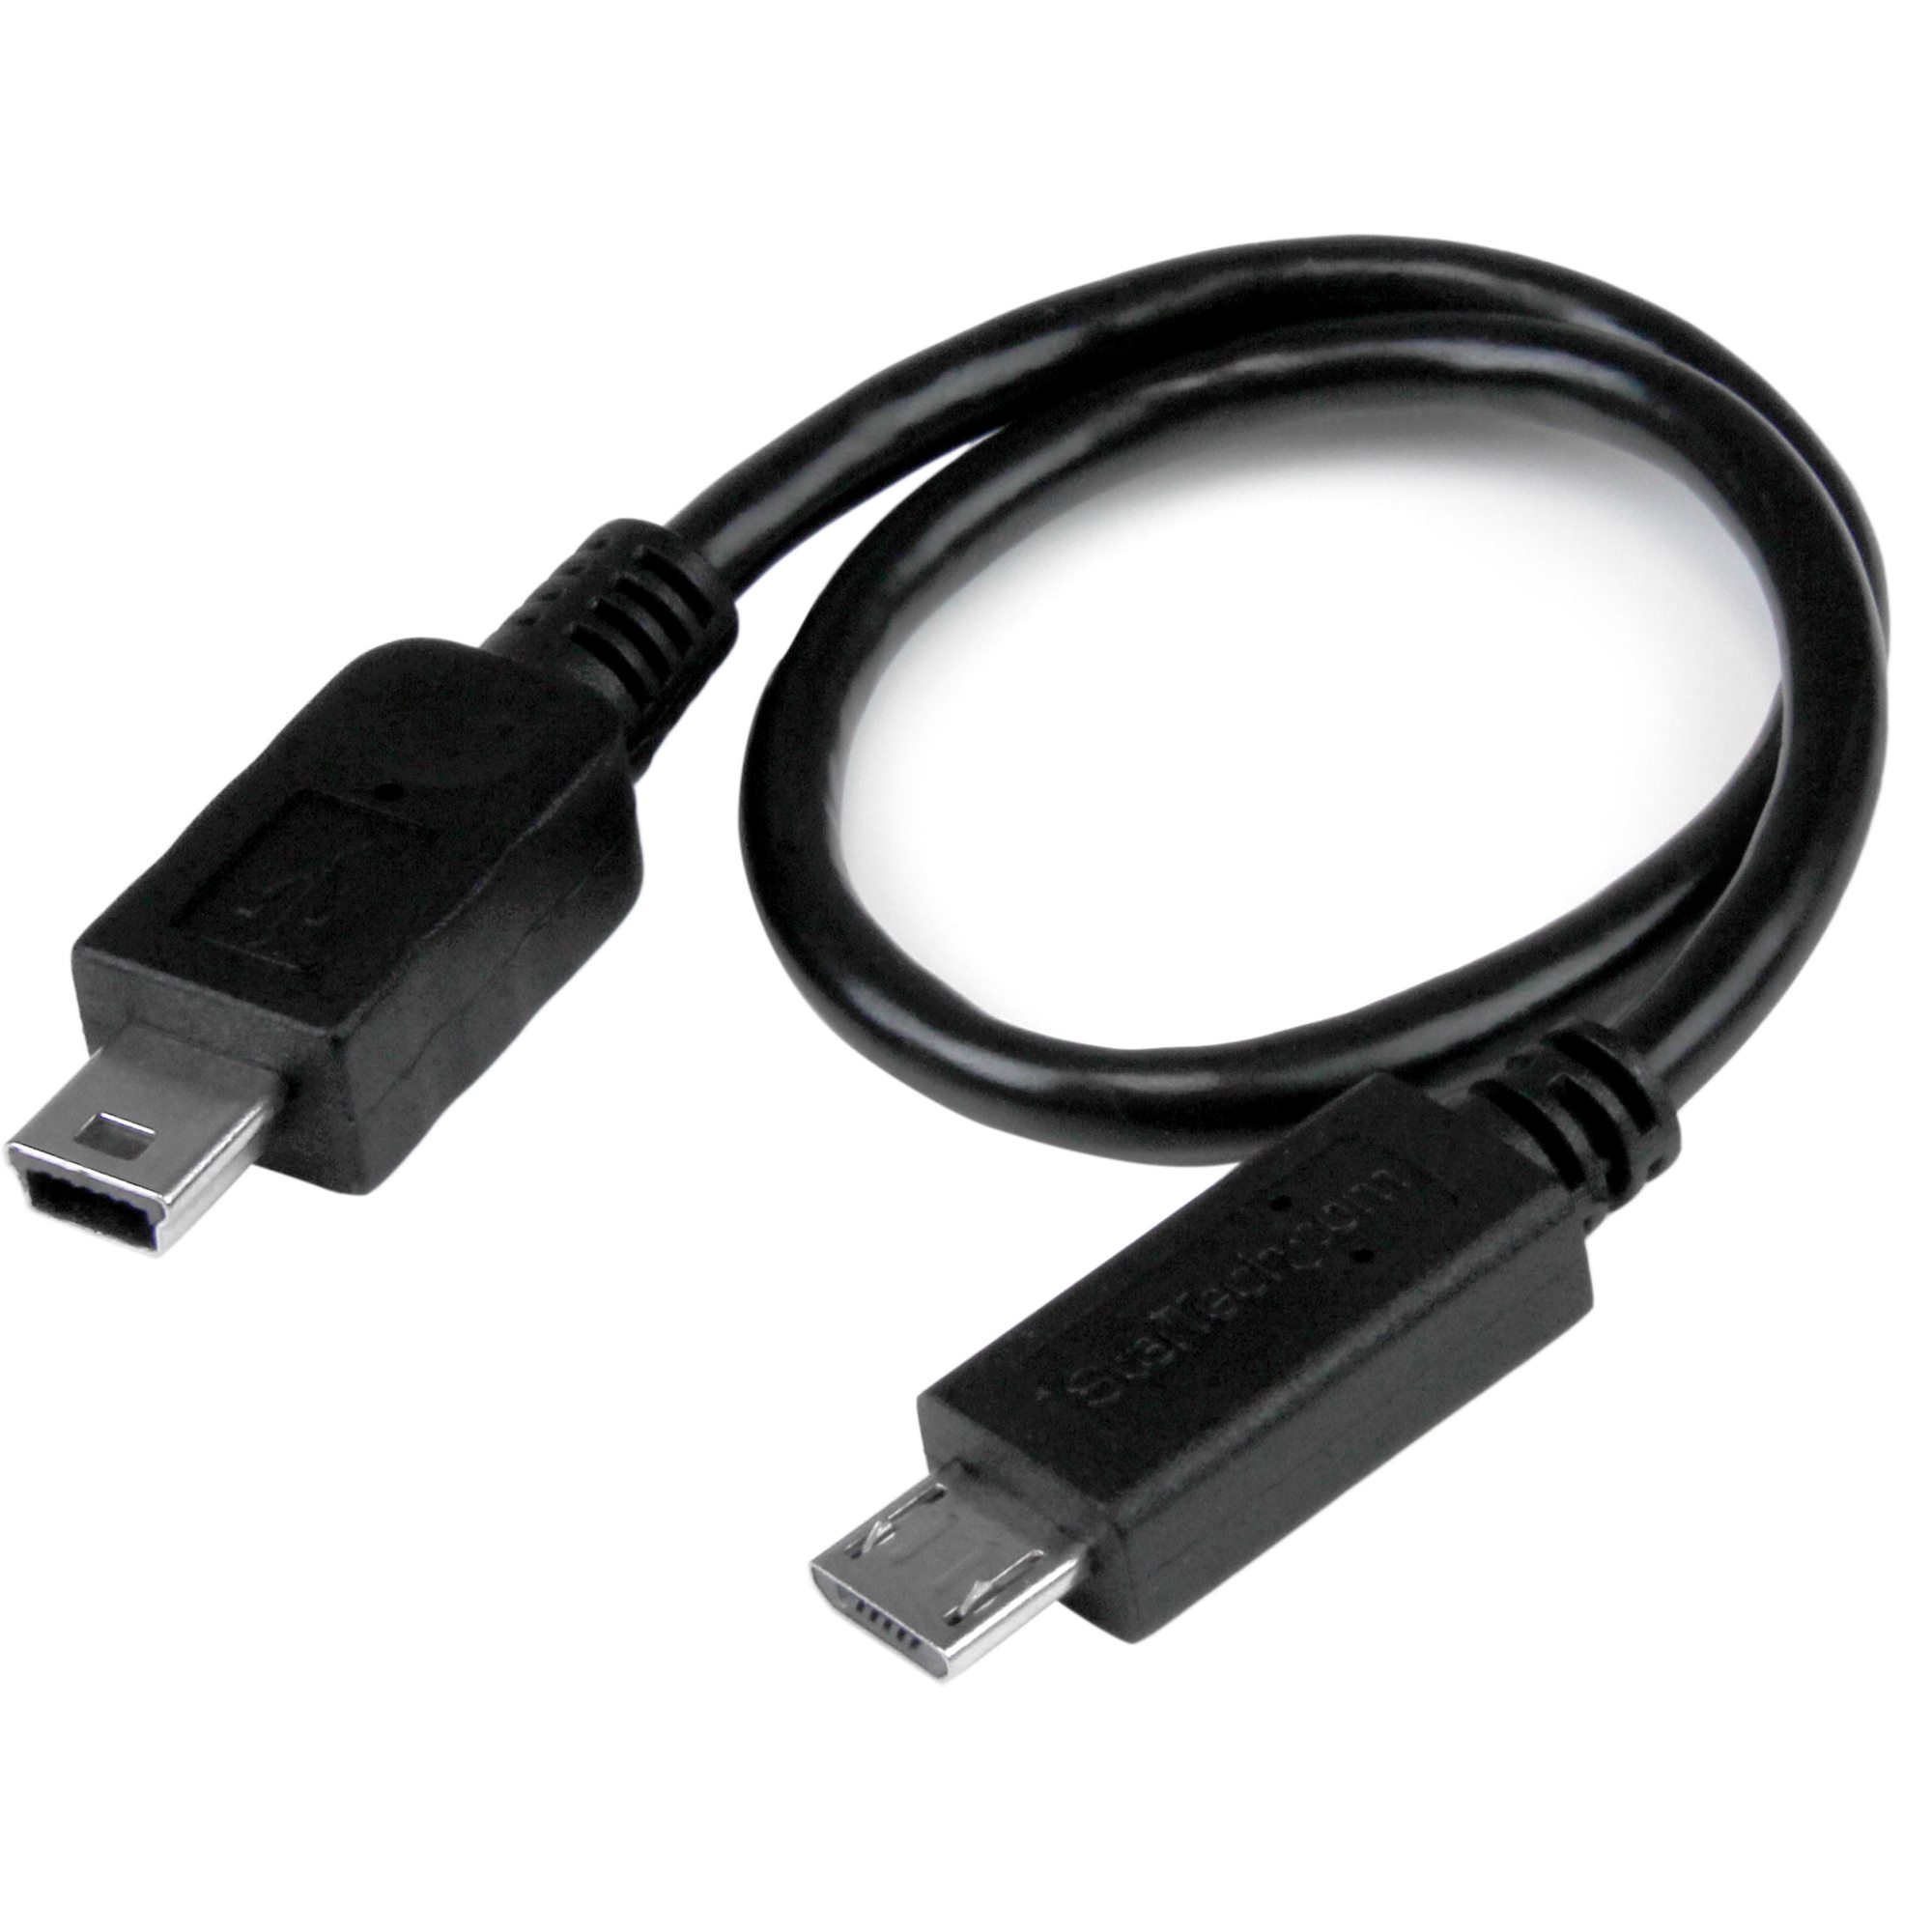 USB OTG Cable - Micro USB to Mini USB - M/M - 8 in. - BCI Imaging Supplies